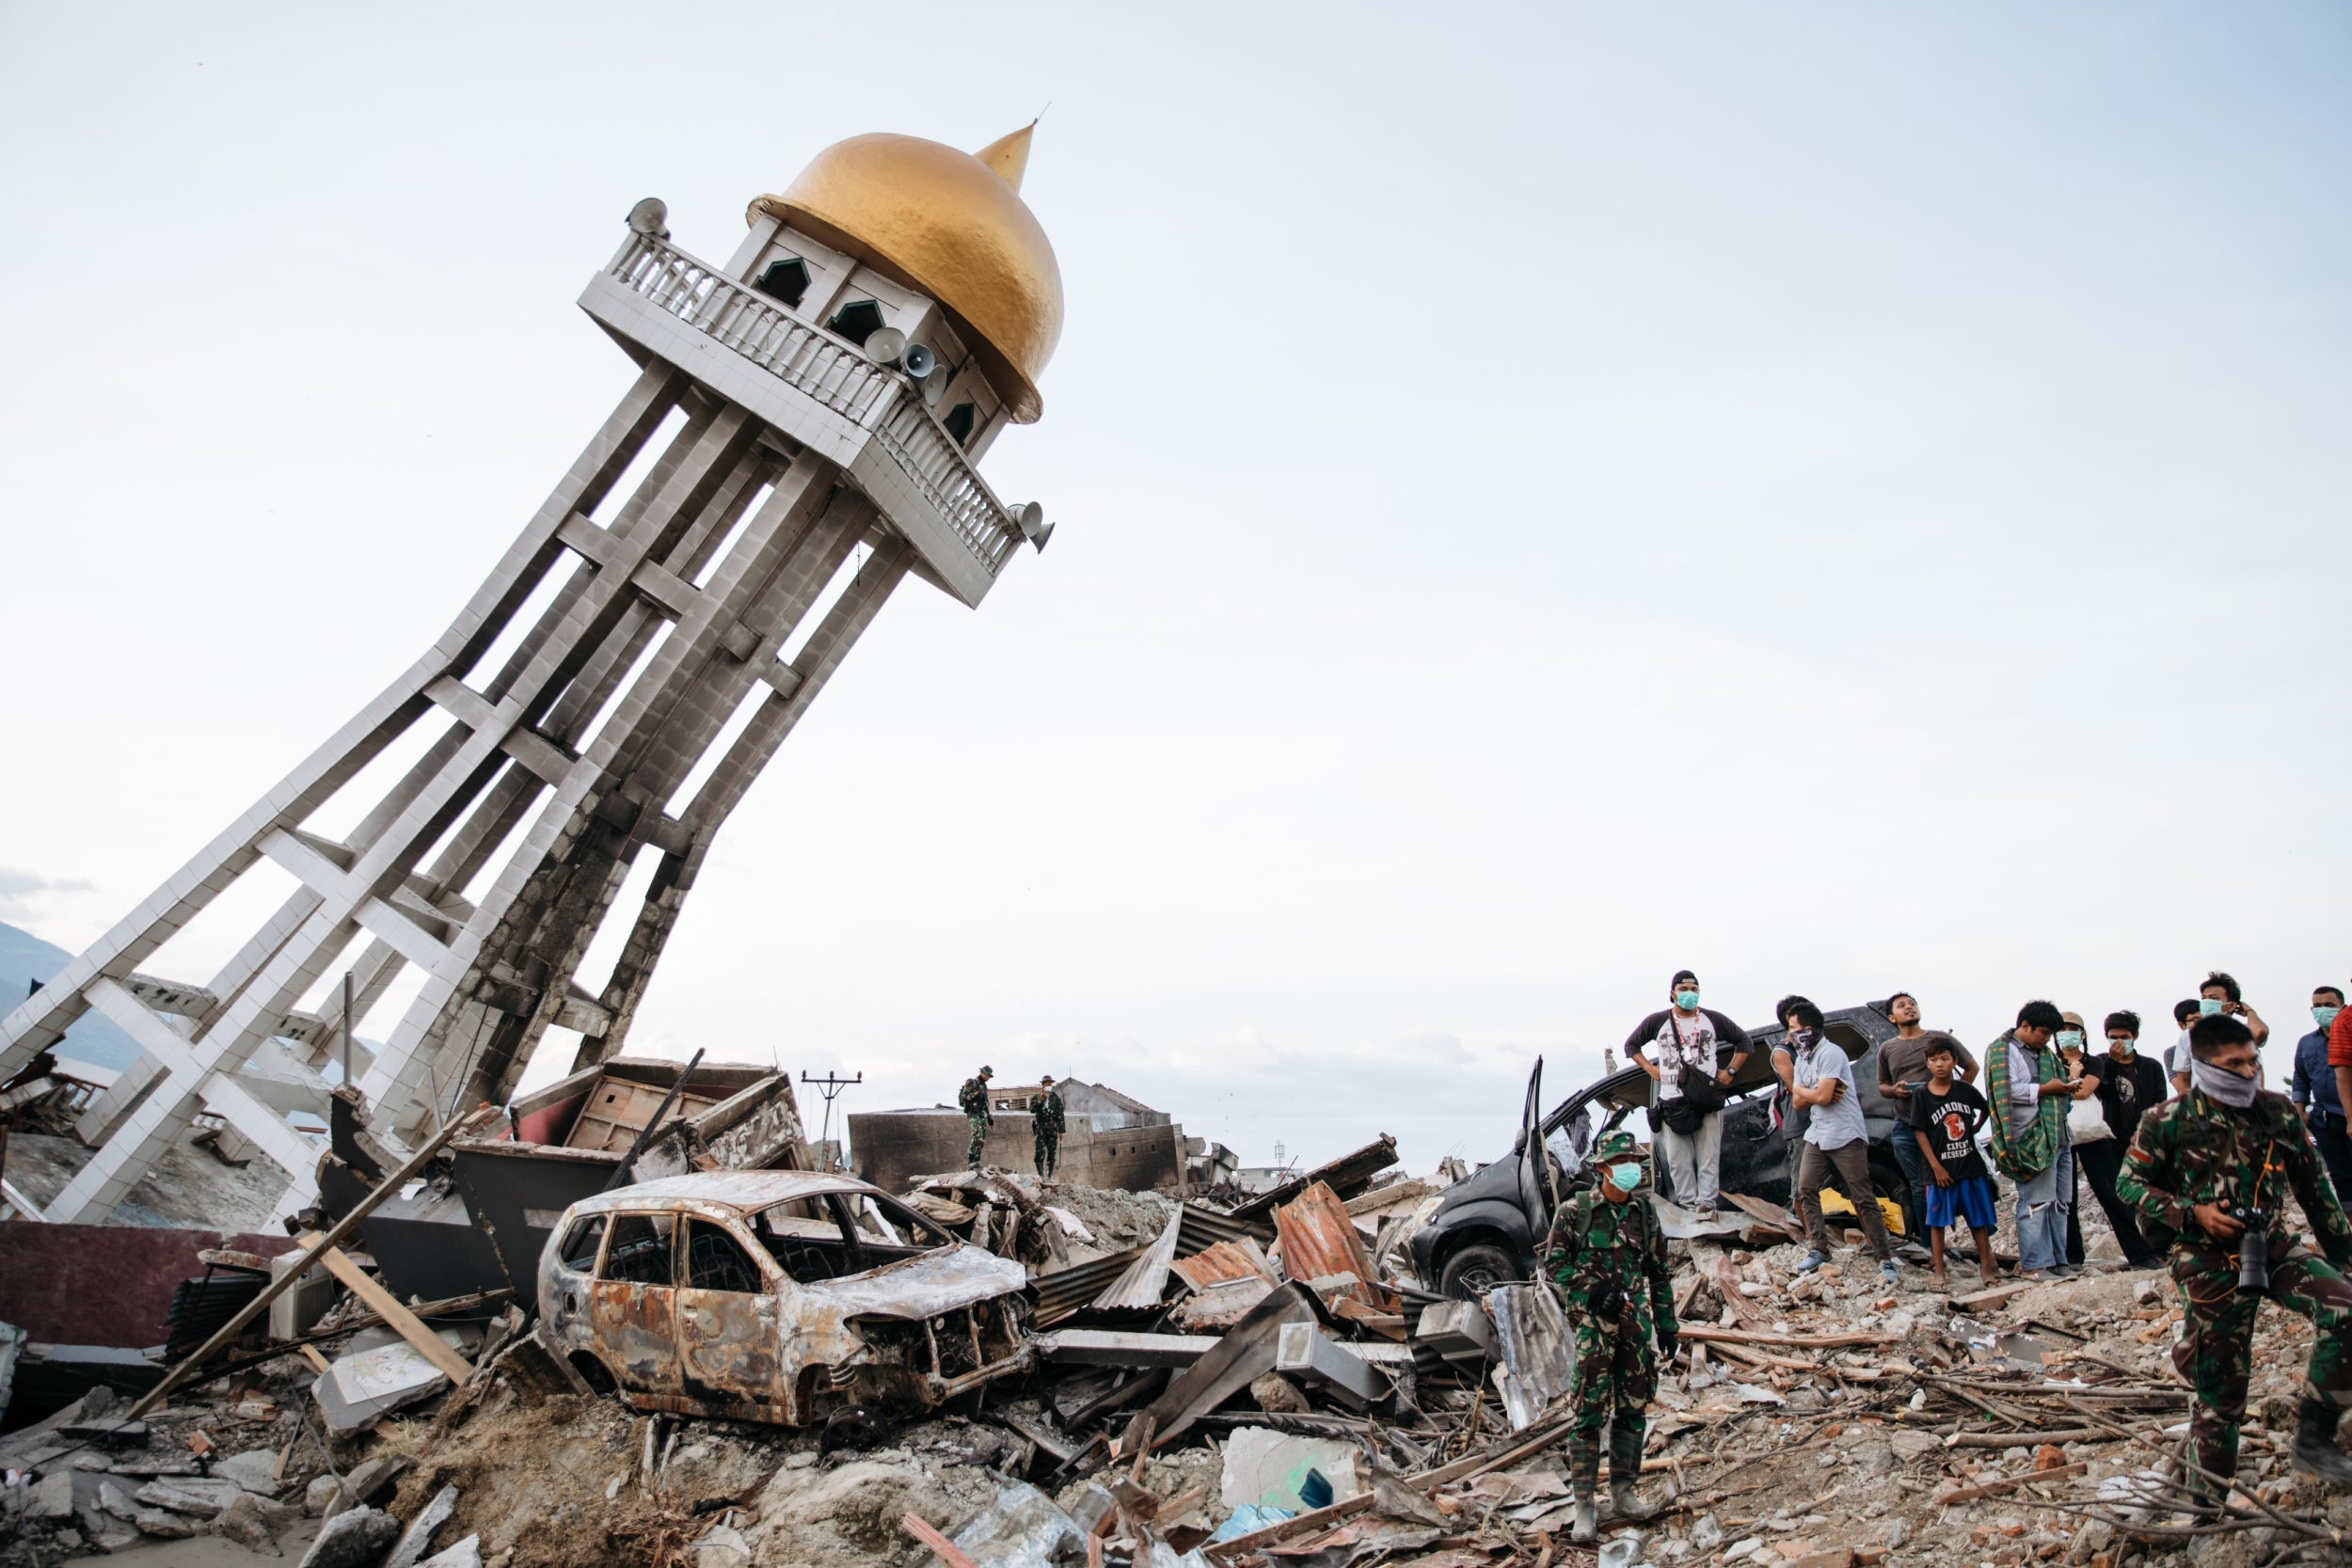 I spent time with the survivors of Indonesia’s earthquake ...